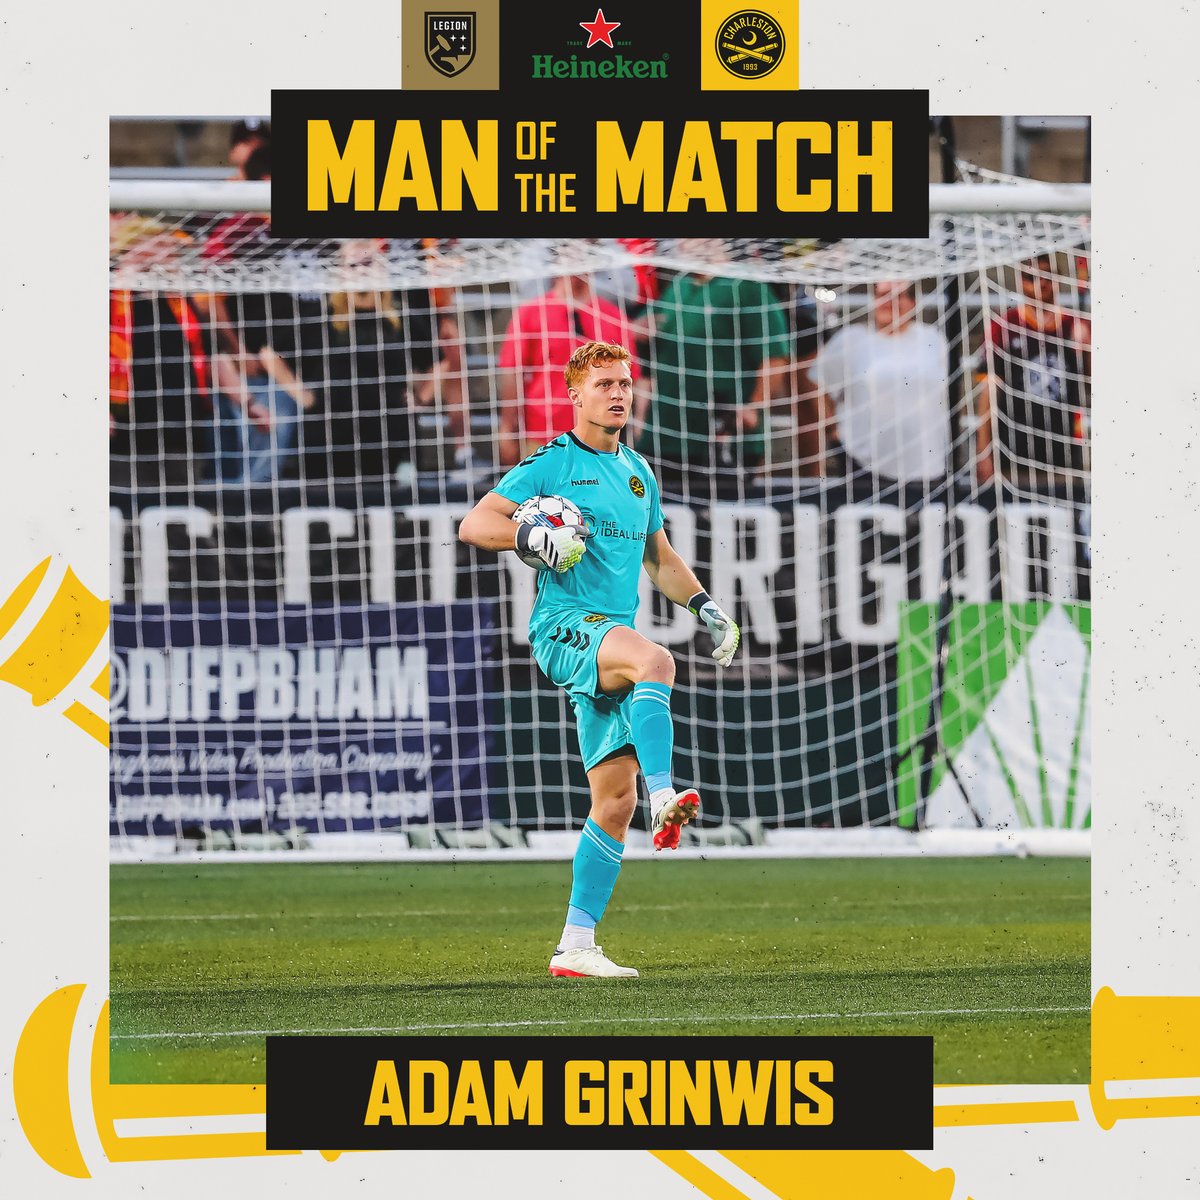 A courageous effort for the shutout victory from @agrinny tonight 👏⭐️

He's your @Heineken Man of the Match!

#BHMvCHS | #CB93 #FortifyAndConquer